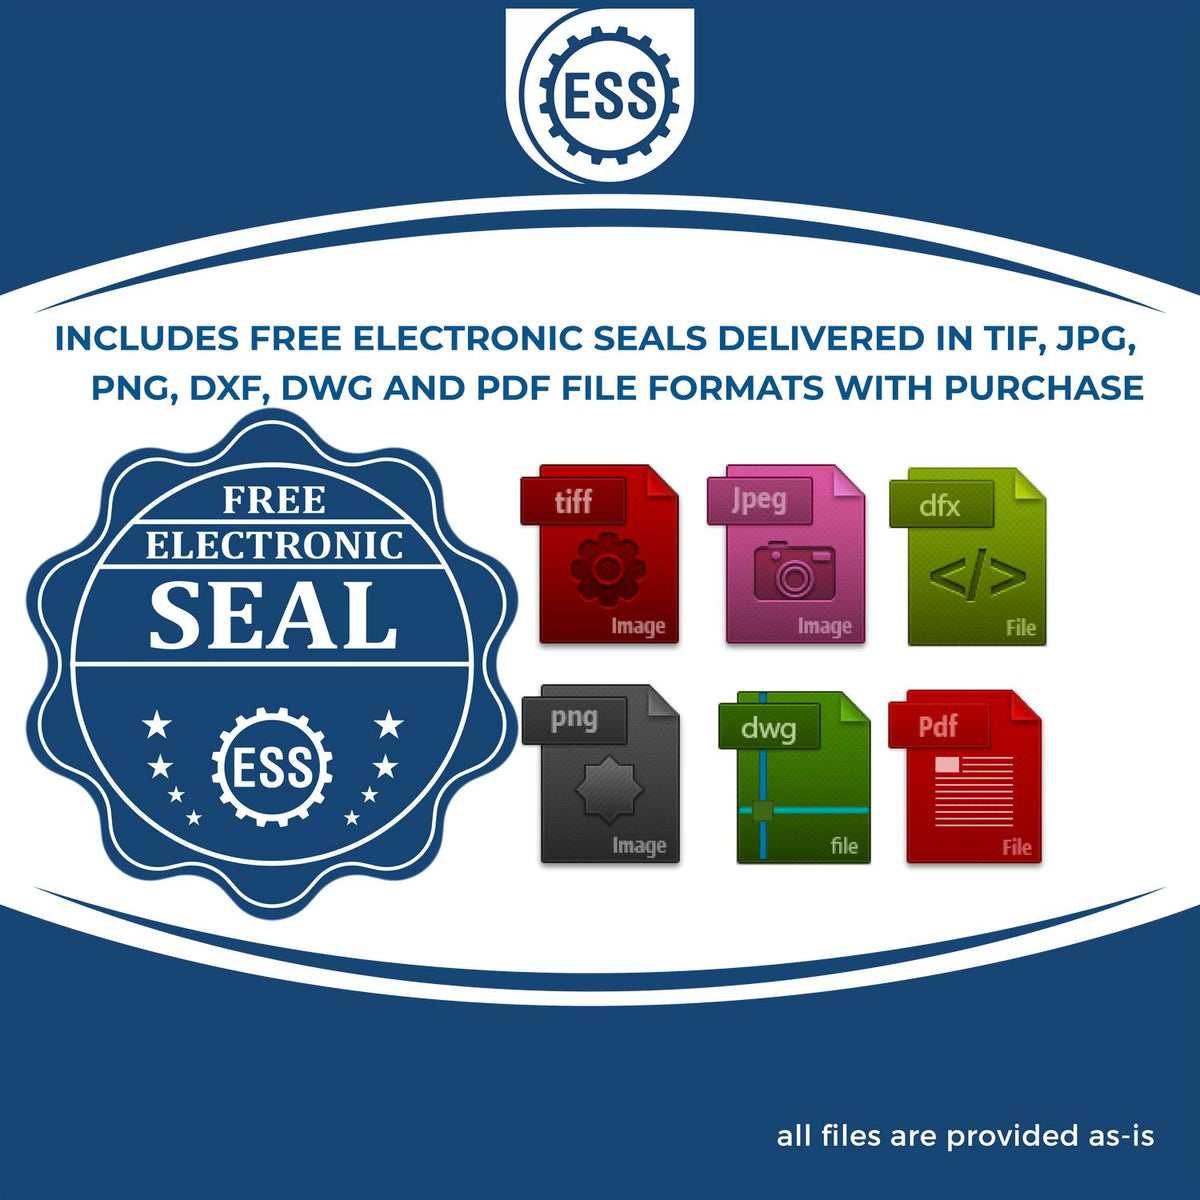 An infographic for the free electronic seal for the Handheld Arkansas Professional Geologist Embosser illustrating the different file type icons such as DXF, DWG, TIF, JPG and PNG.